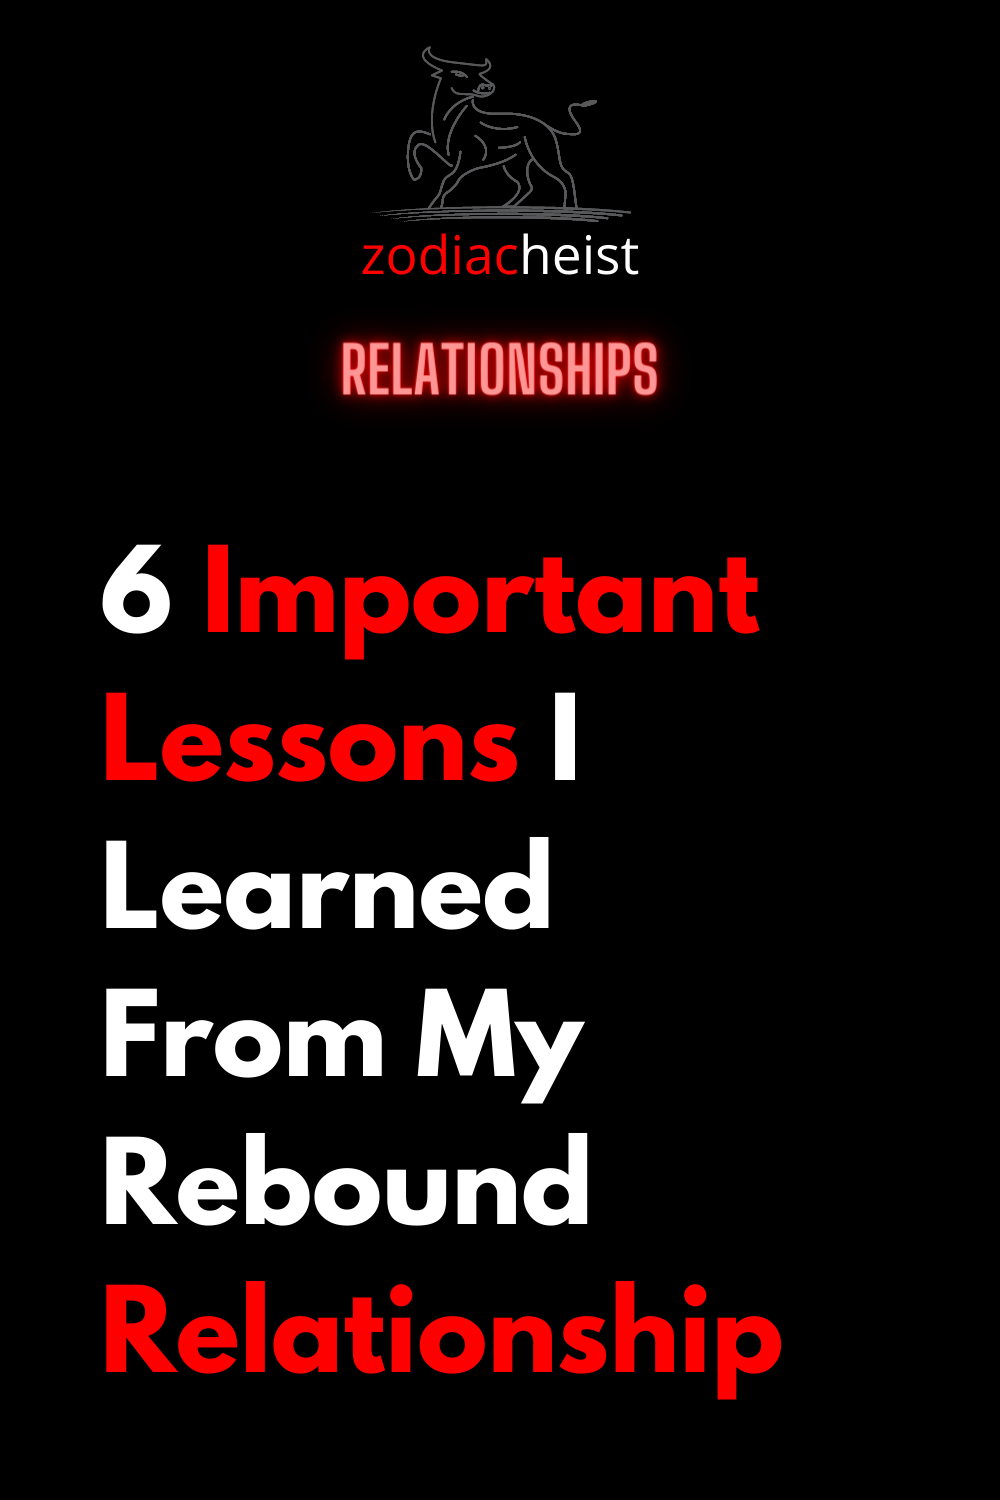 6 Important Lessons I Learned From My Rebound Relationship